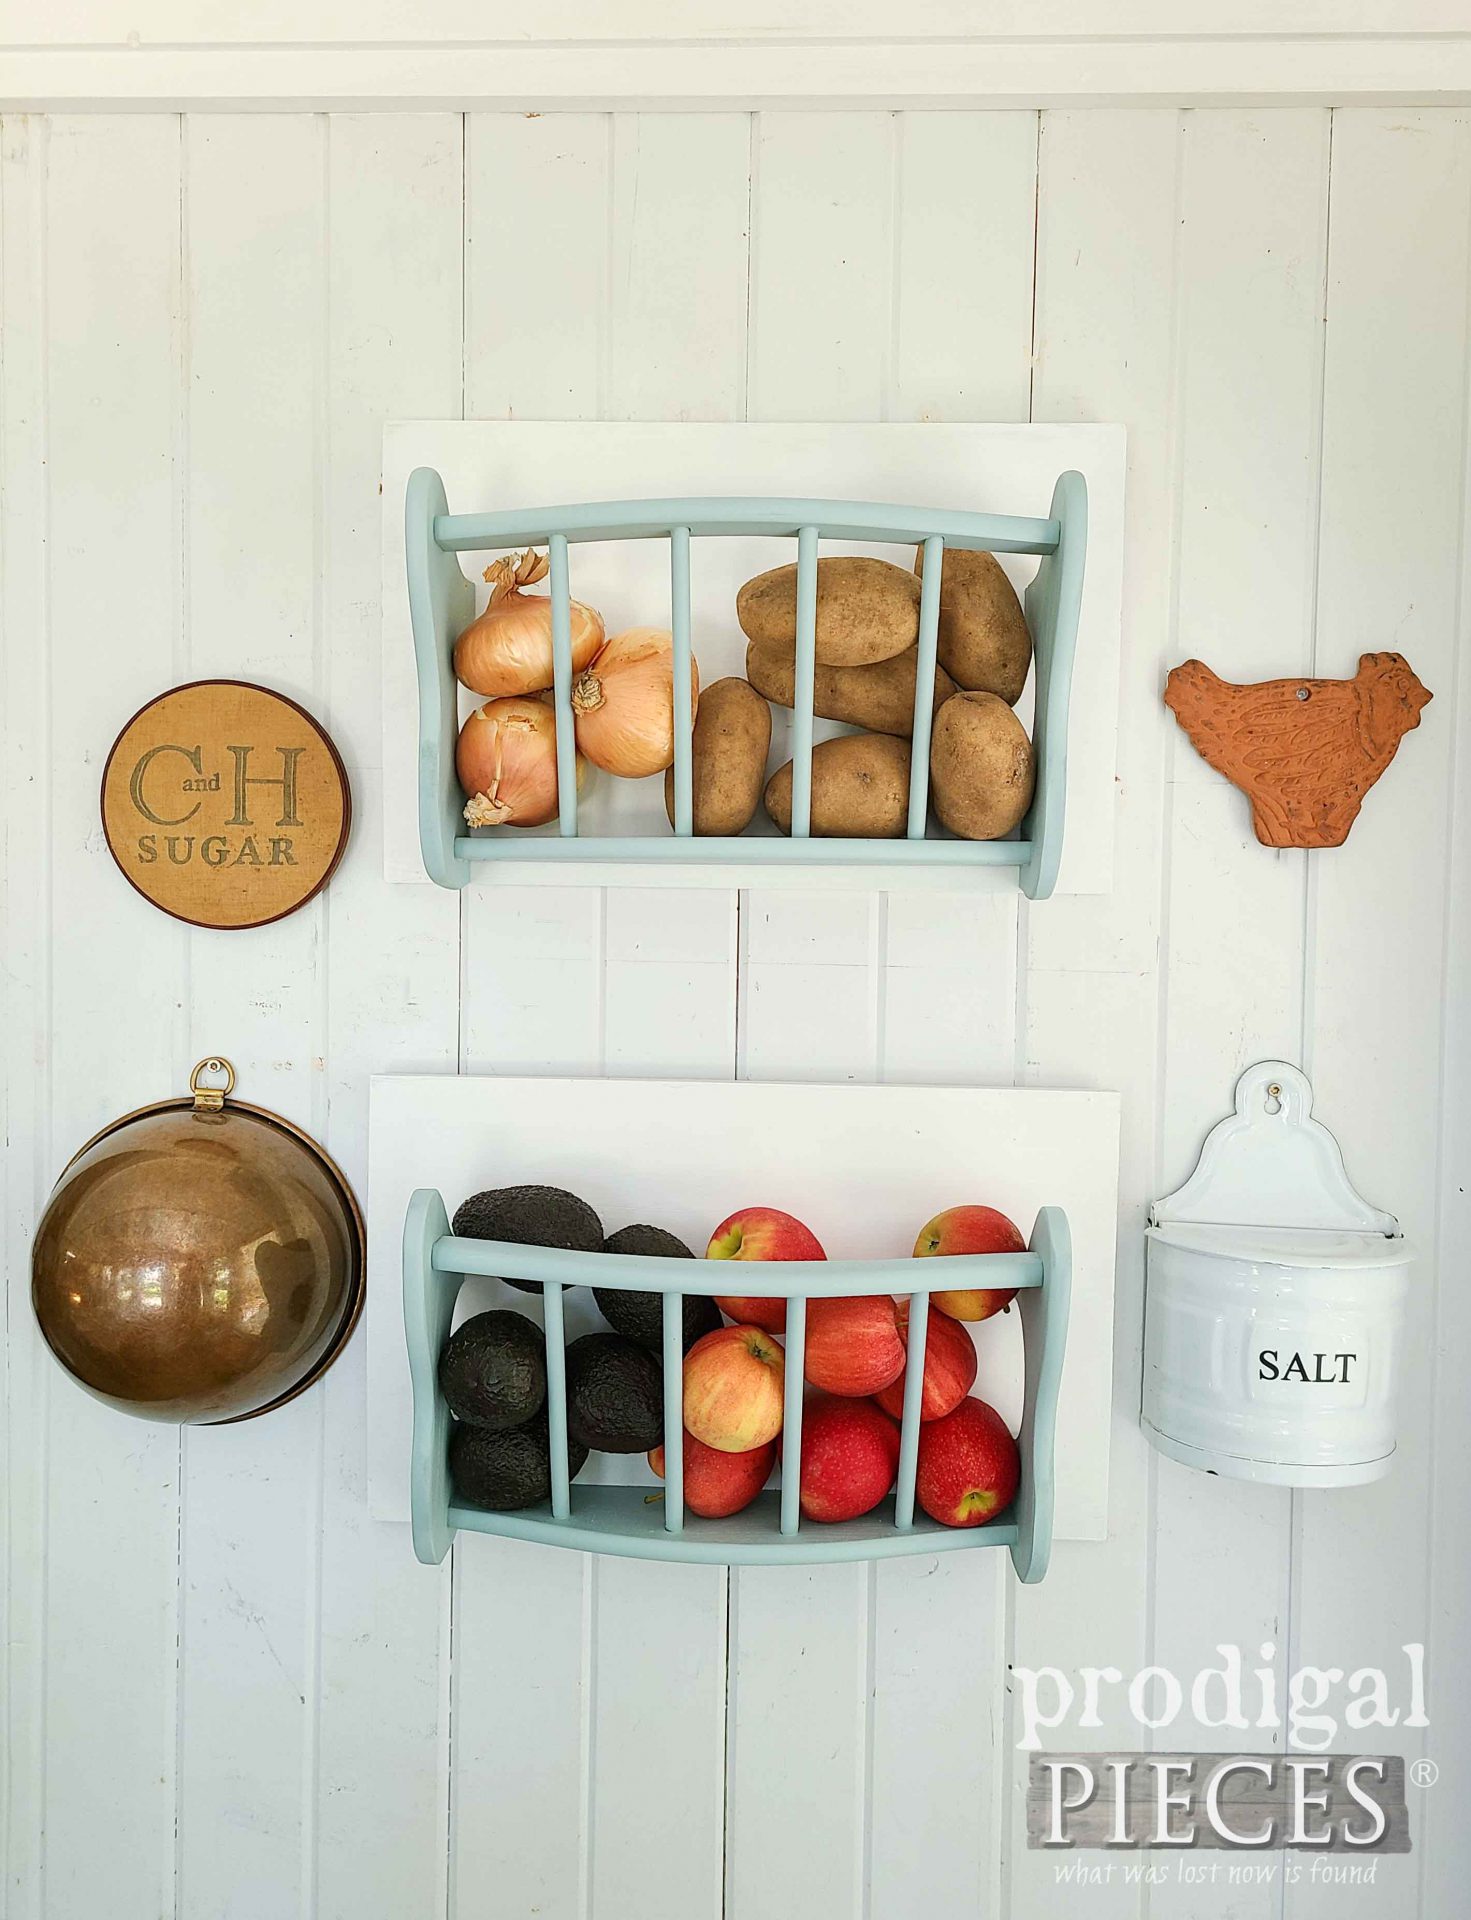 Farmhouse Wall Pockets from Side Table Upcycled by Larissa of Prodigal Pieces | prodigalpieces.com #prodigalpieces #farmhouse #storage #upcycled